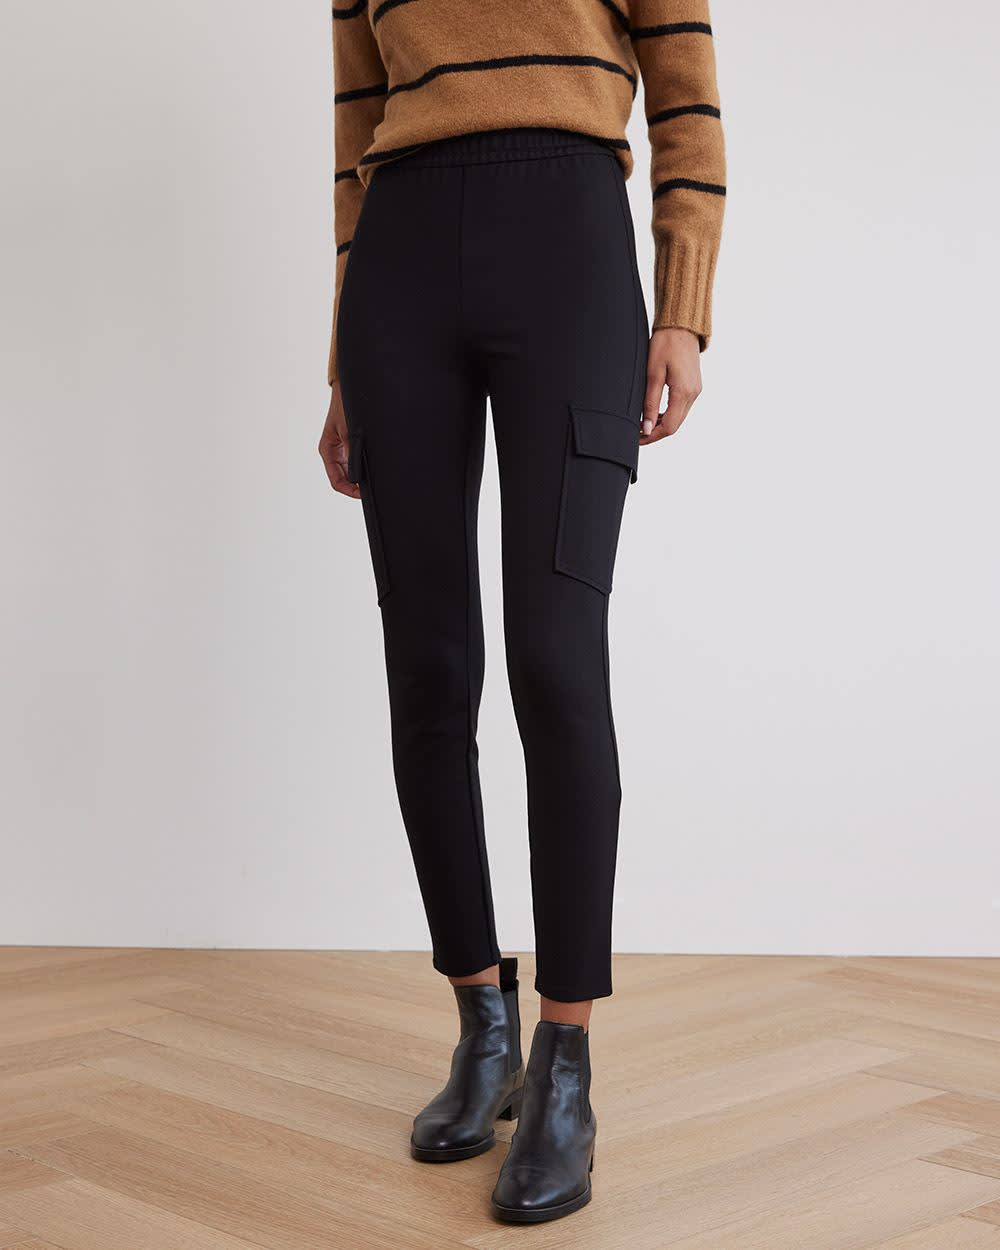 Legging Pant with Cargo Pockets